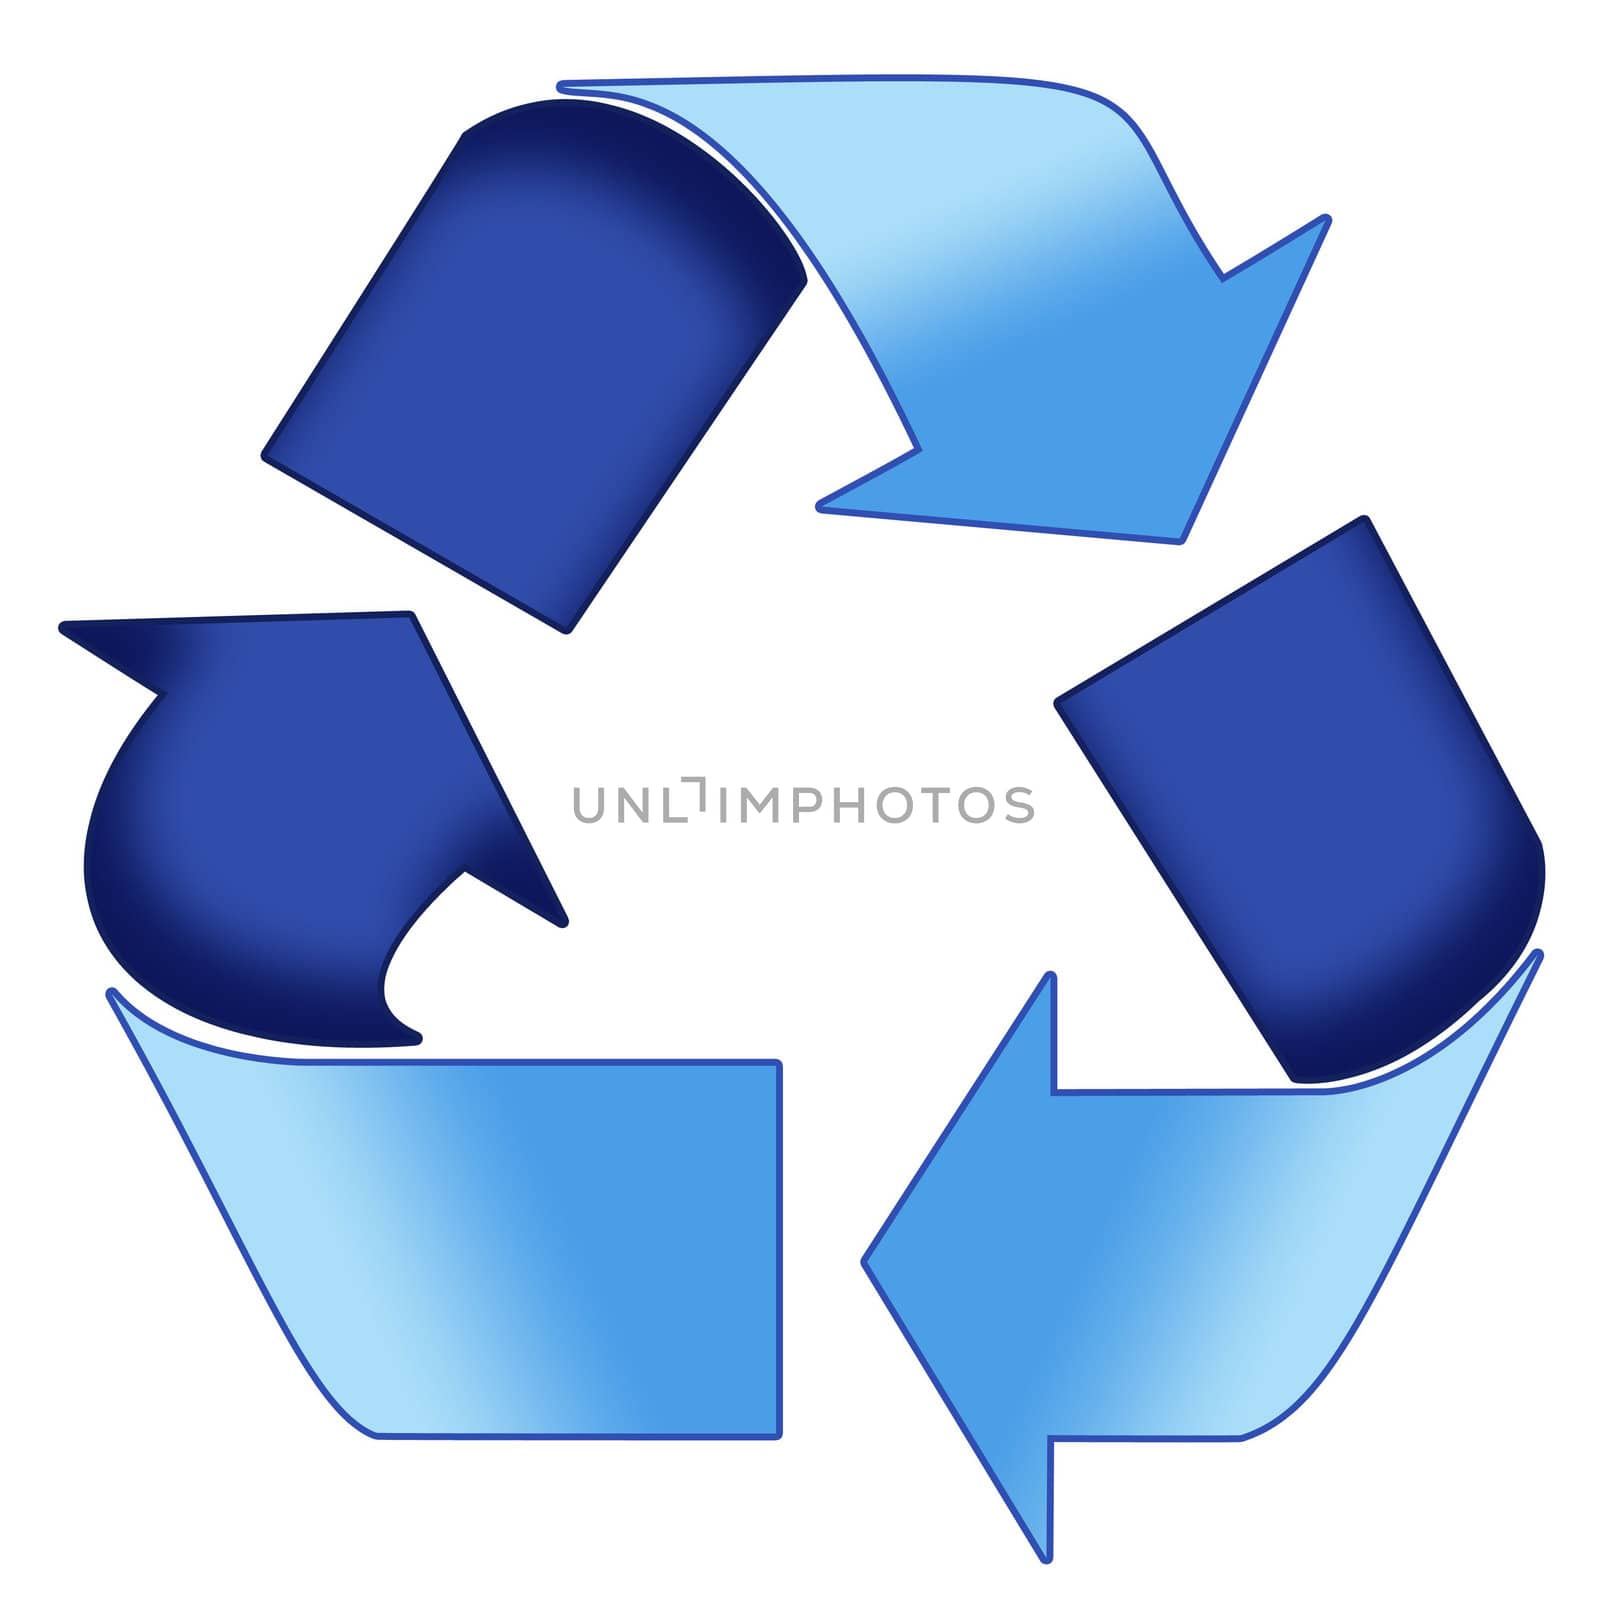 A Colourful Blue 3d Recycle Symbol Illustration